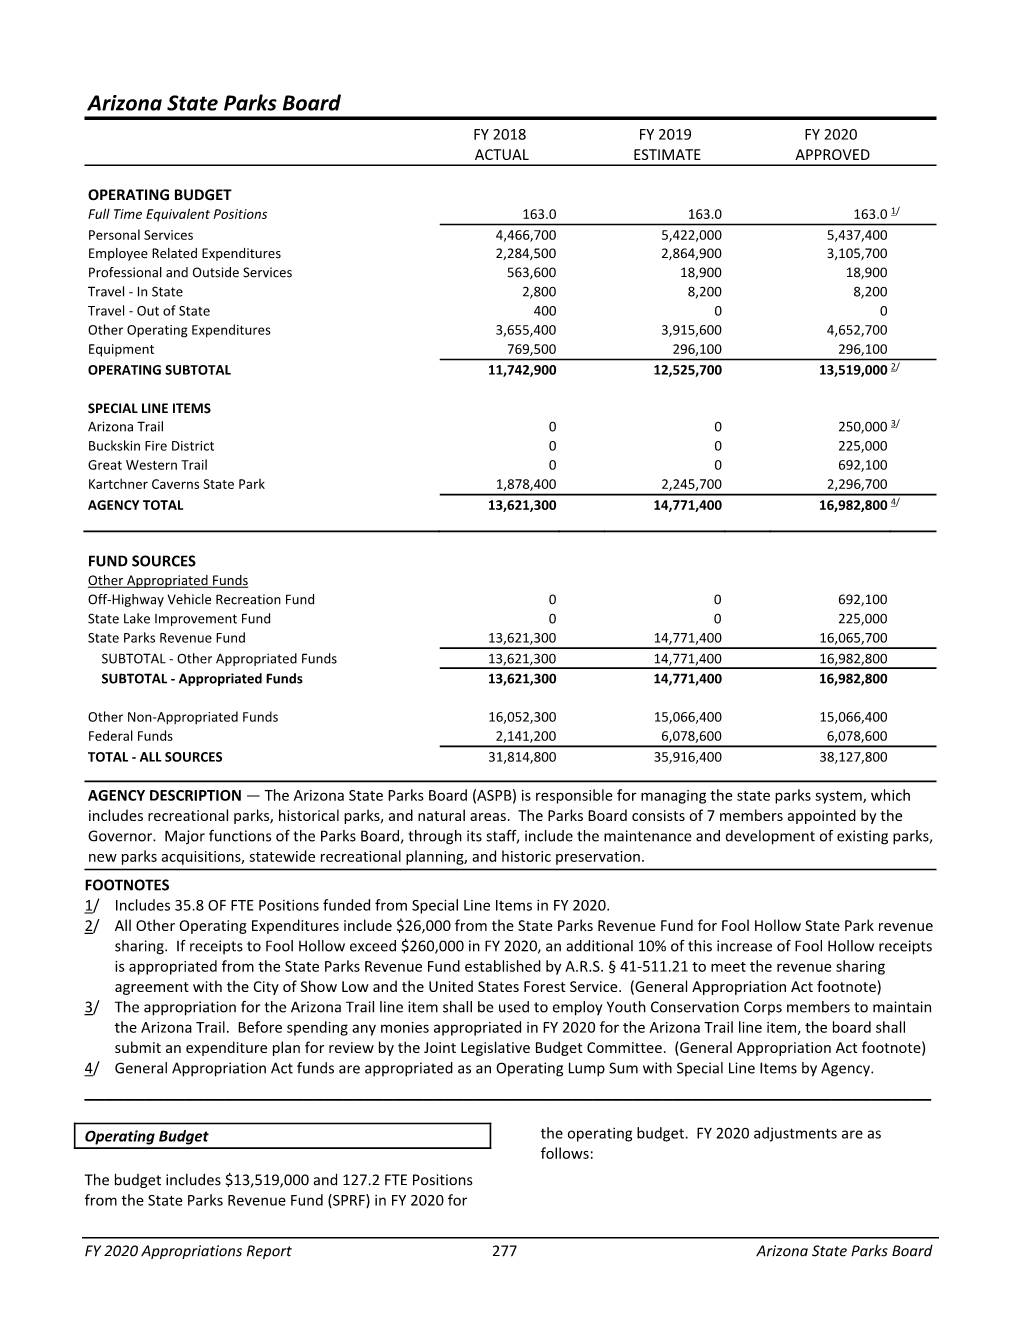 FY 2020 Appropriations Report